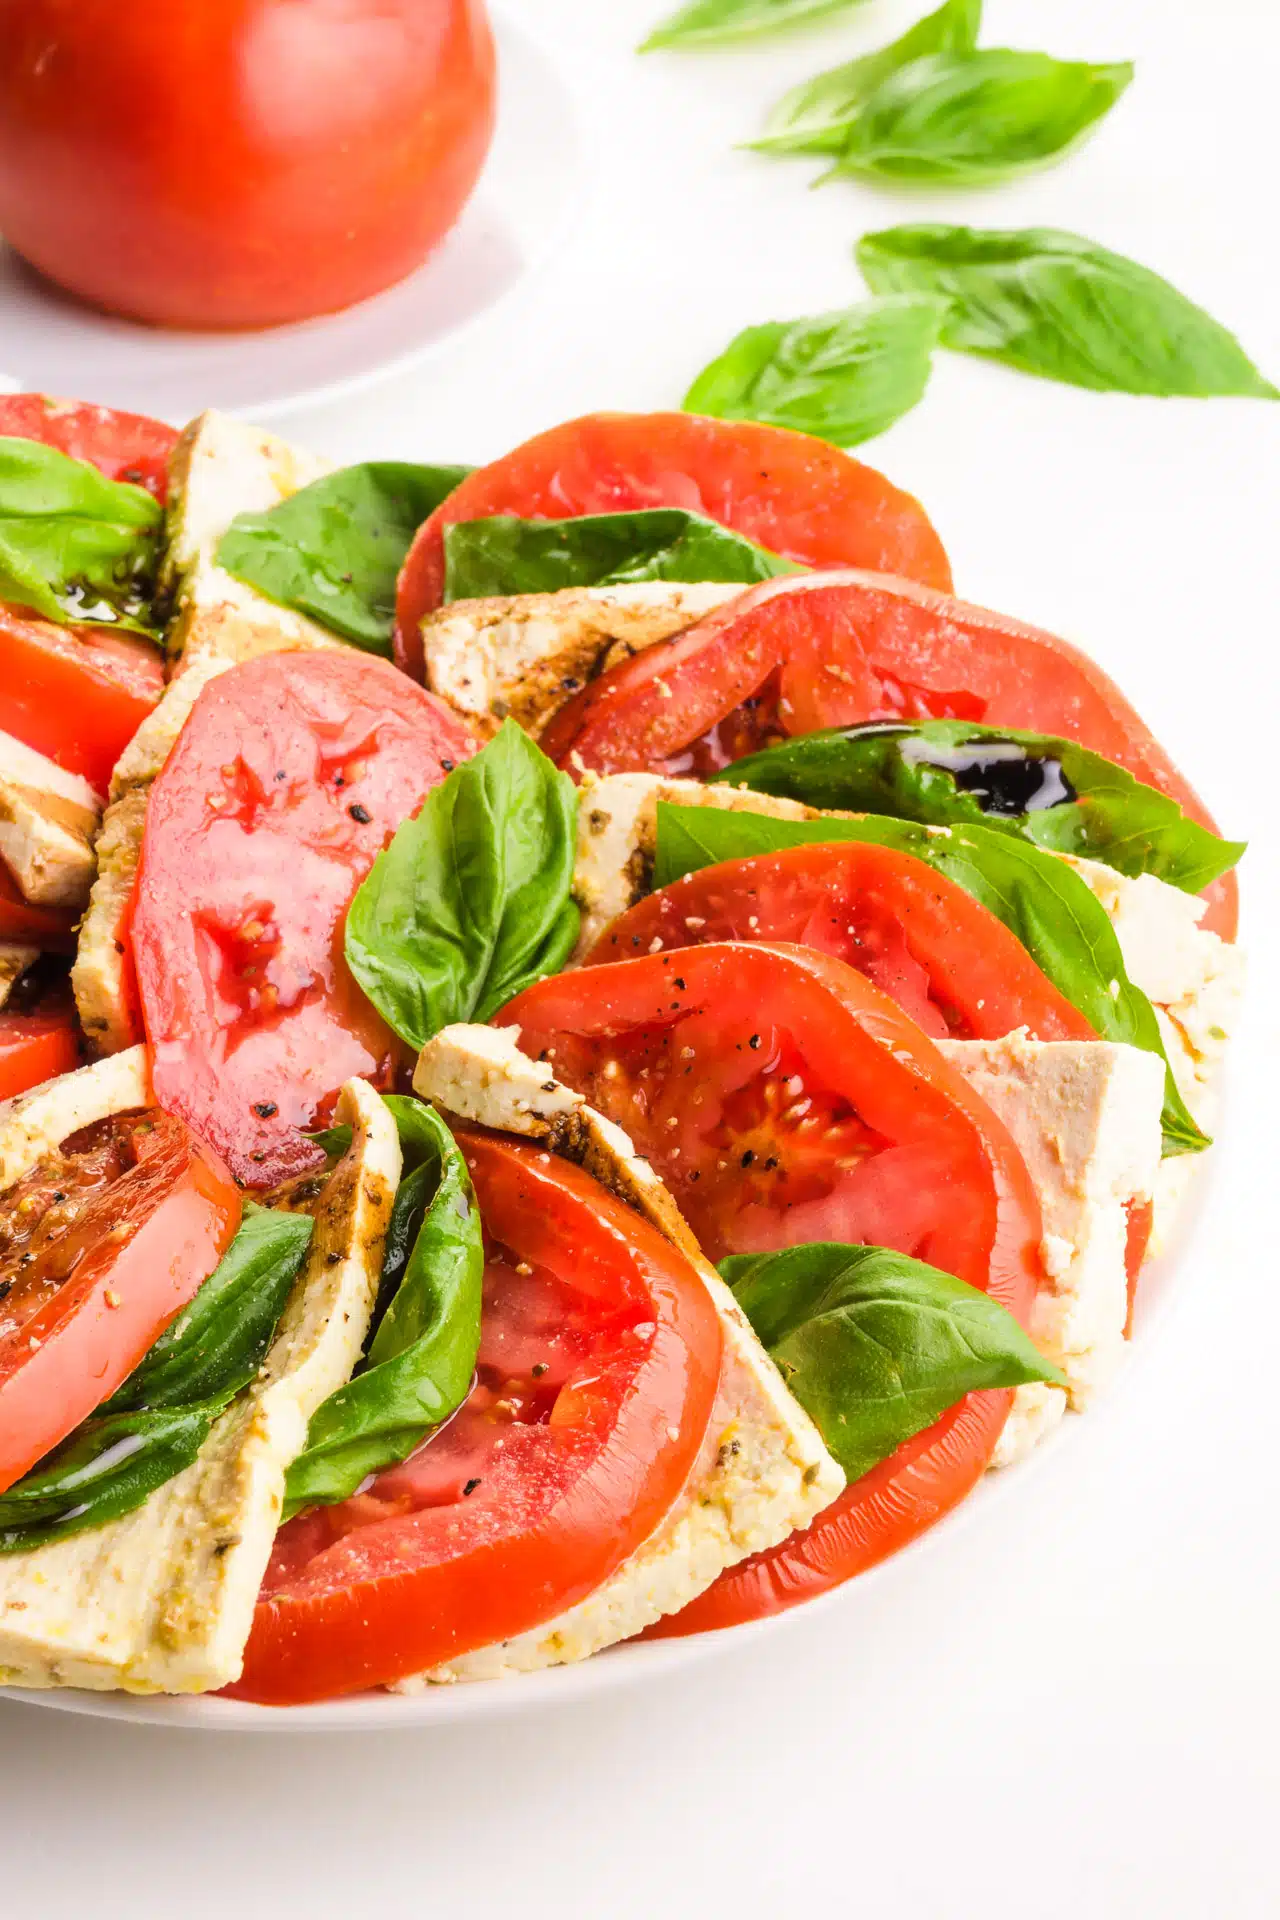 A closeup of vegan cpreses salad on a plate. There are fresh basil leaves and a tomato in the background.